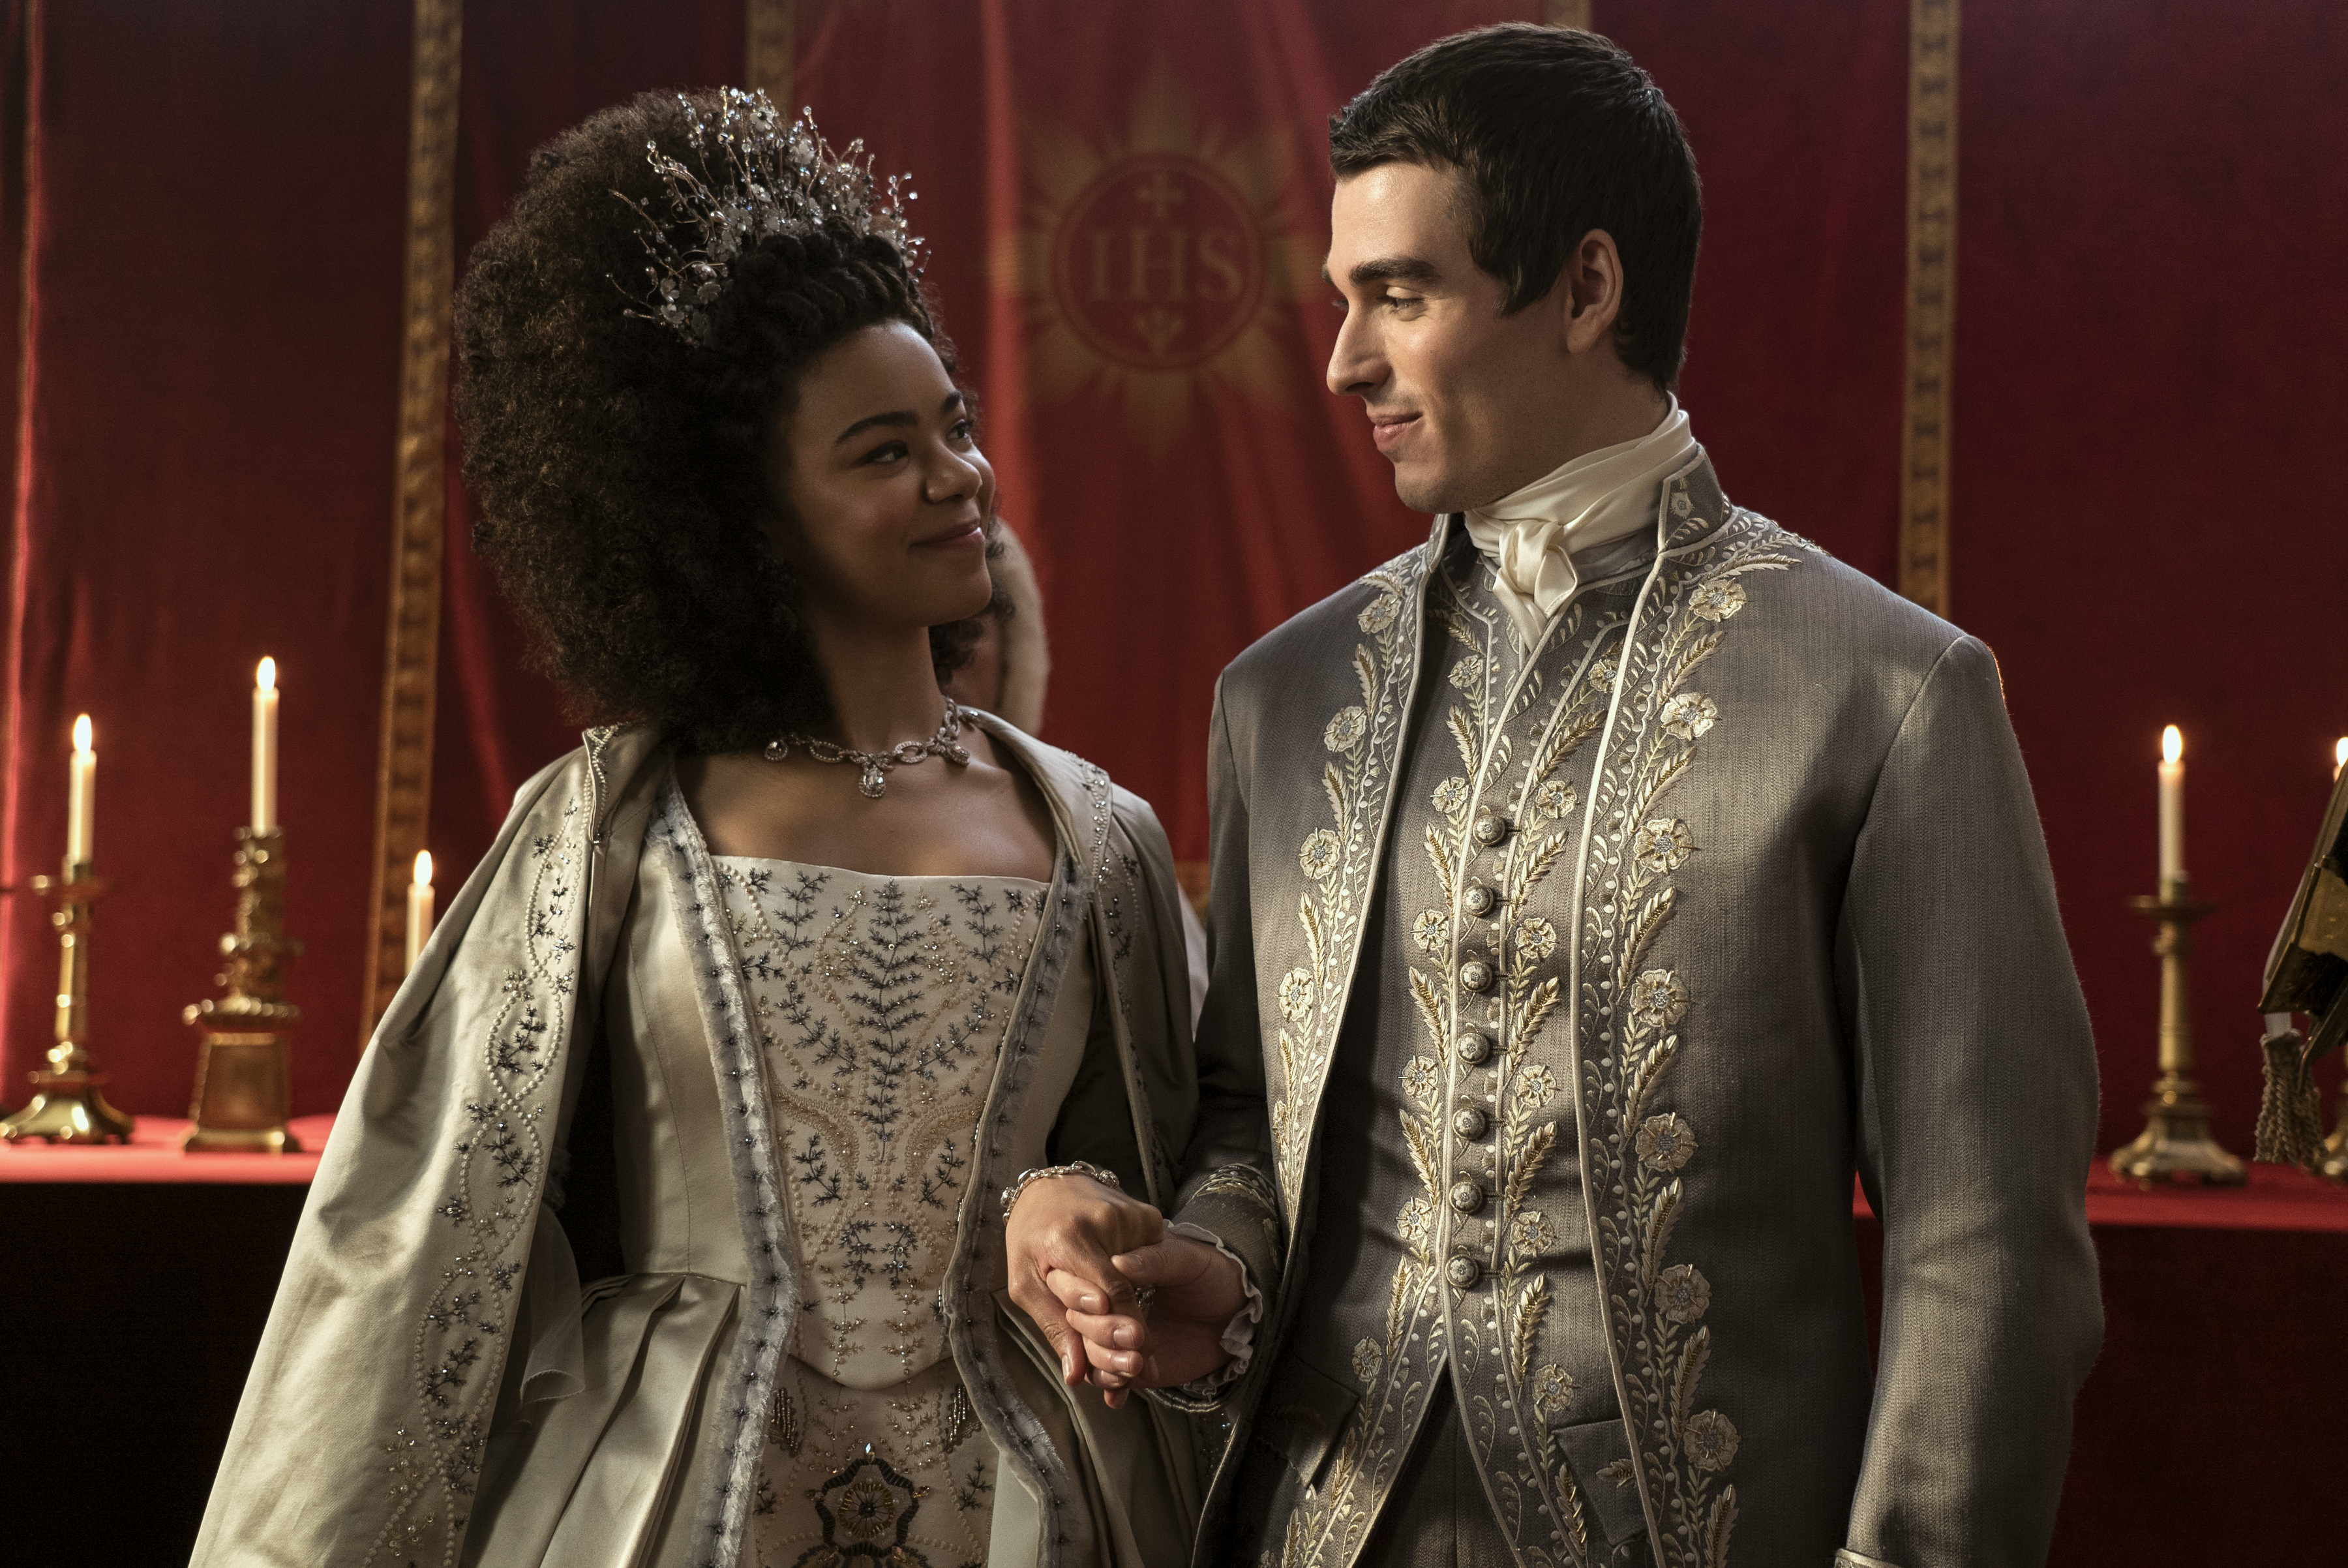 A young Black queen in Regency dress, looking next to her at her young white king.